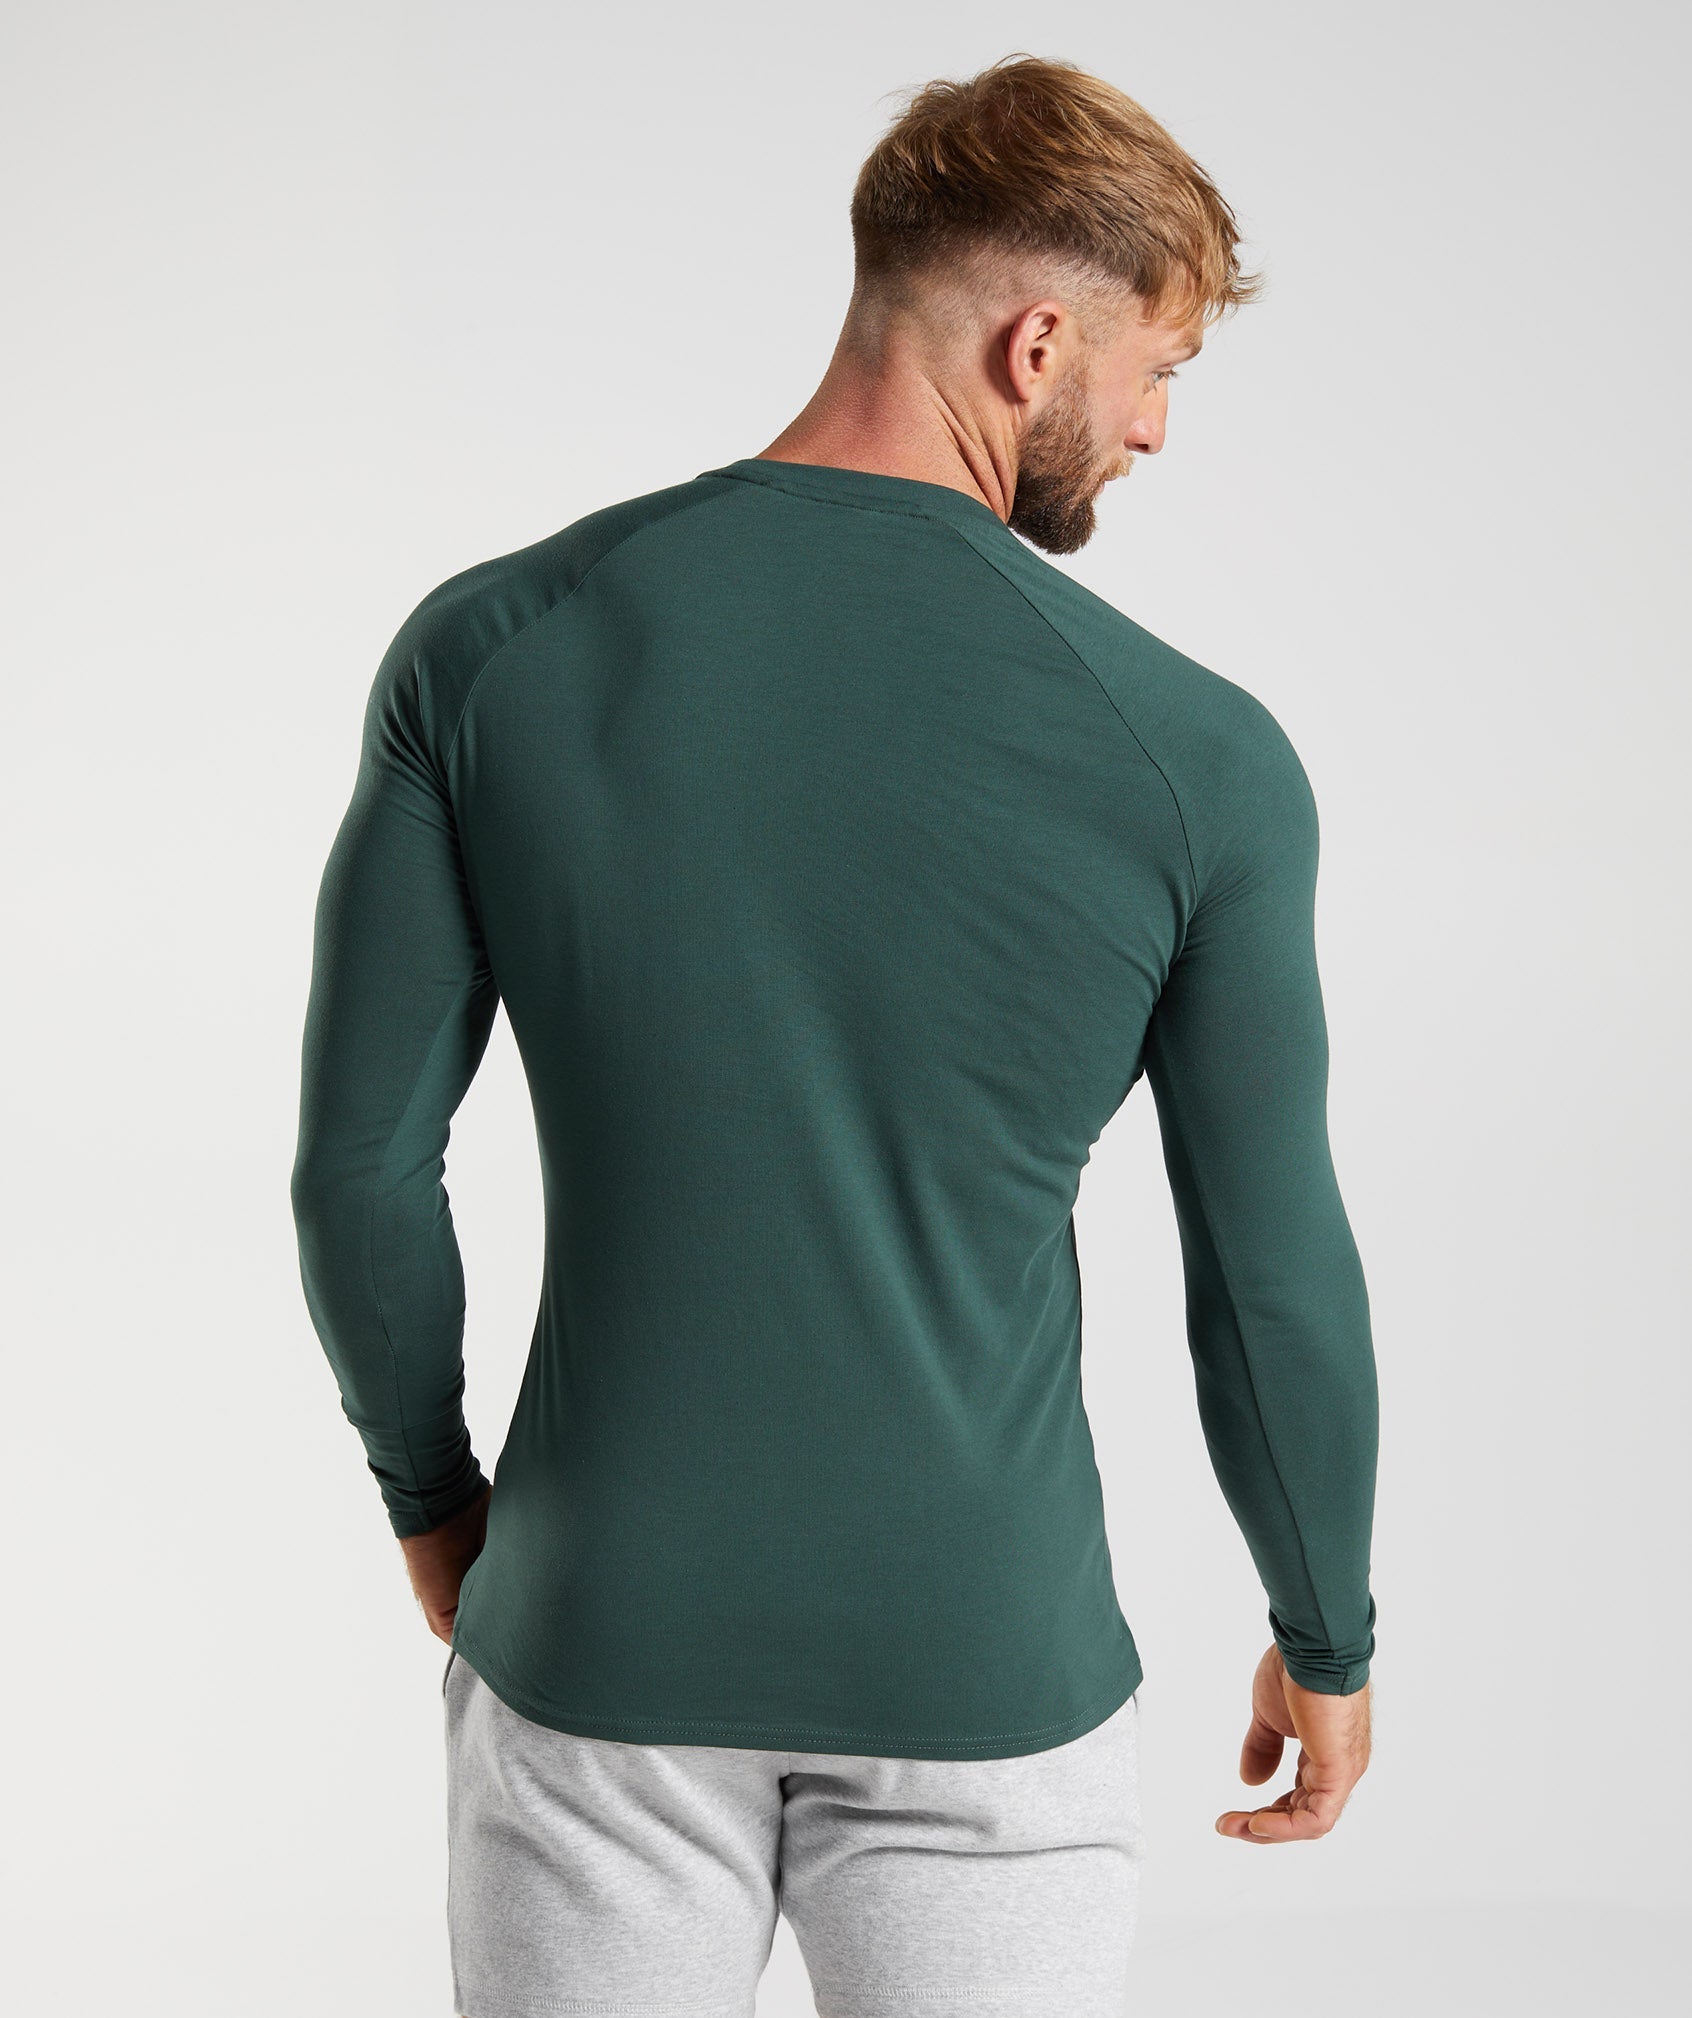 Apollo Long Sleeve T-Shirt in Obsidian Green - view 2